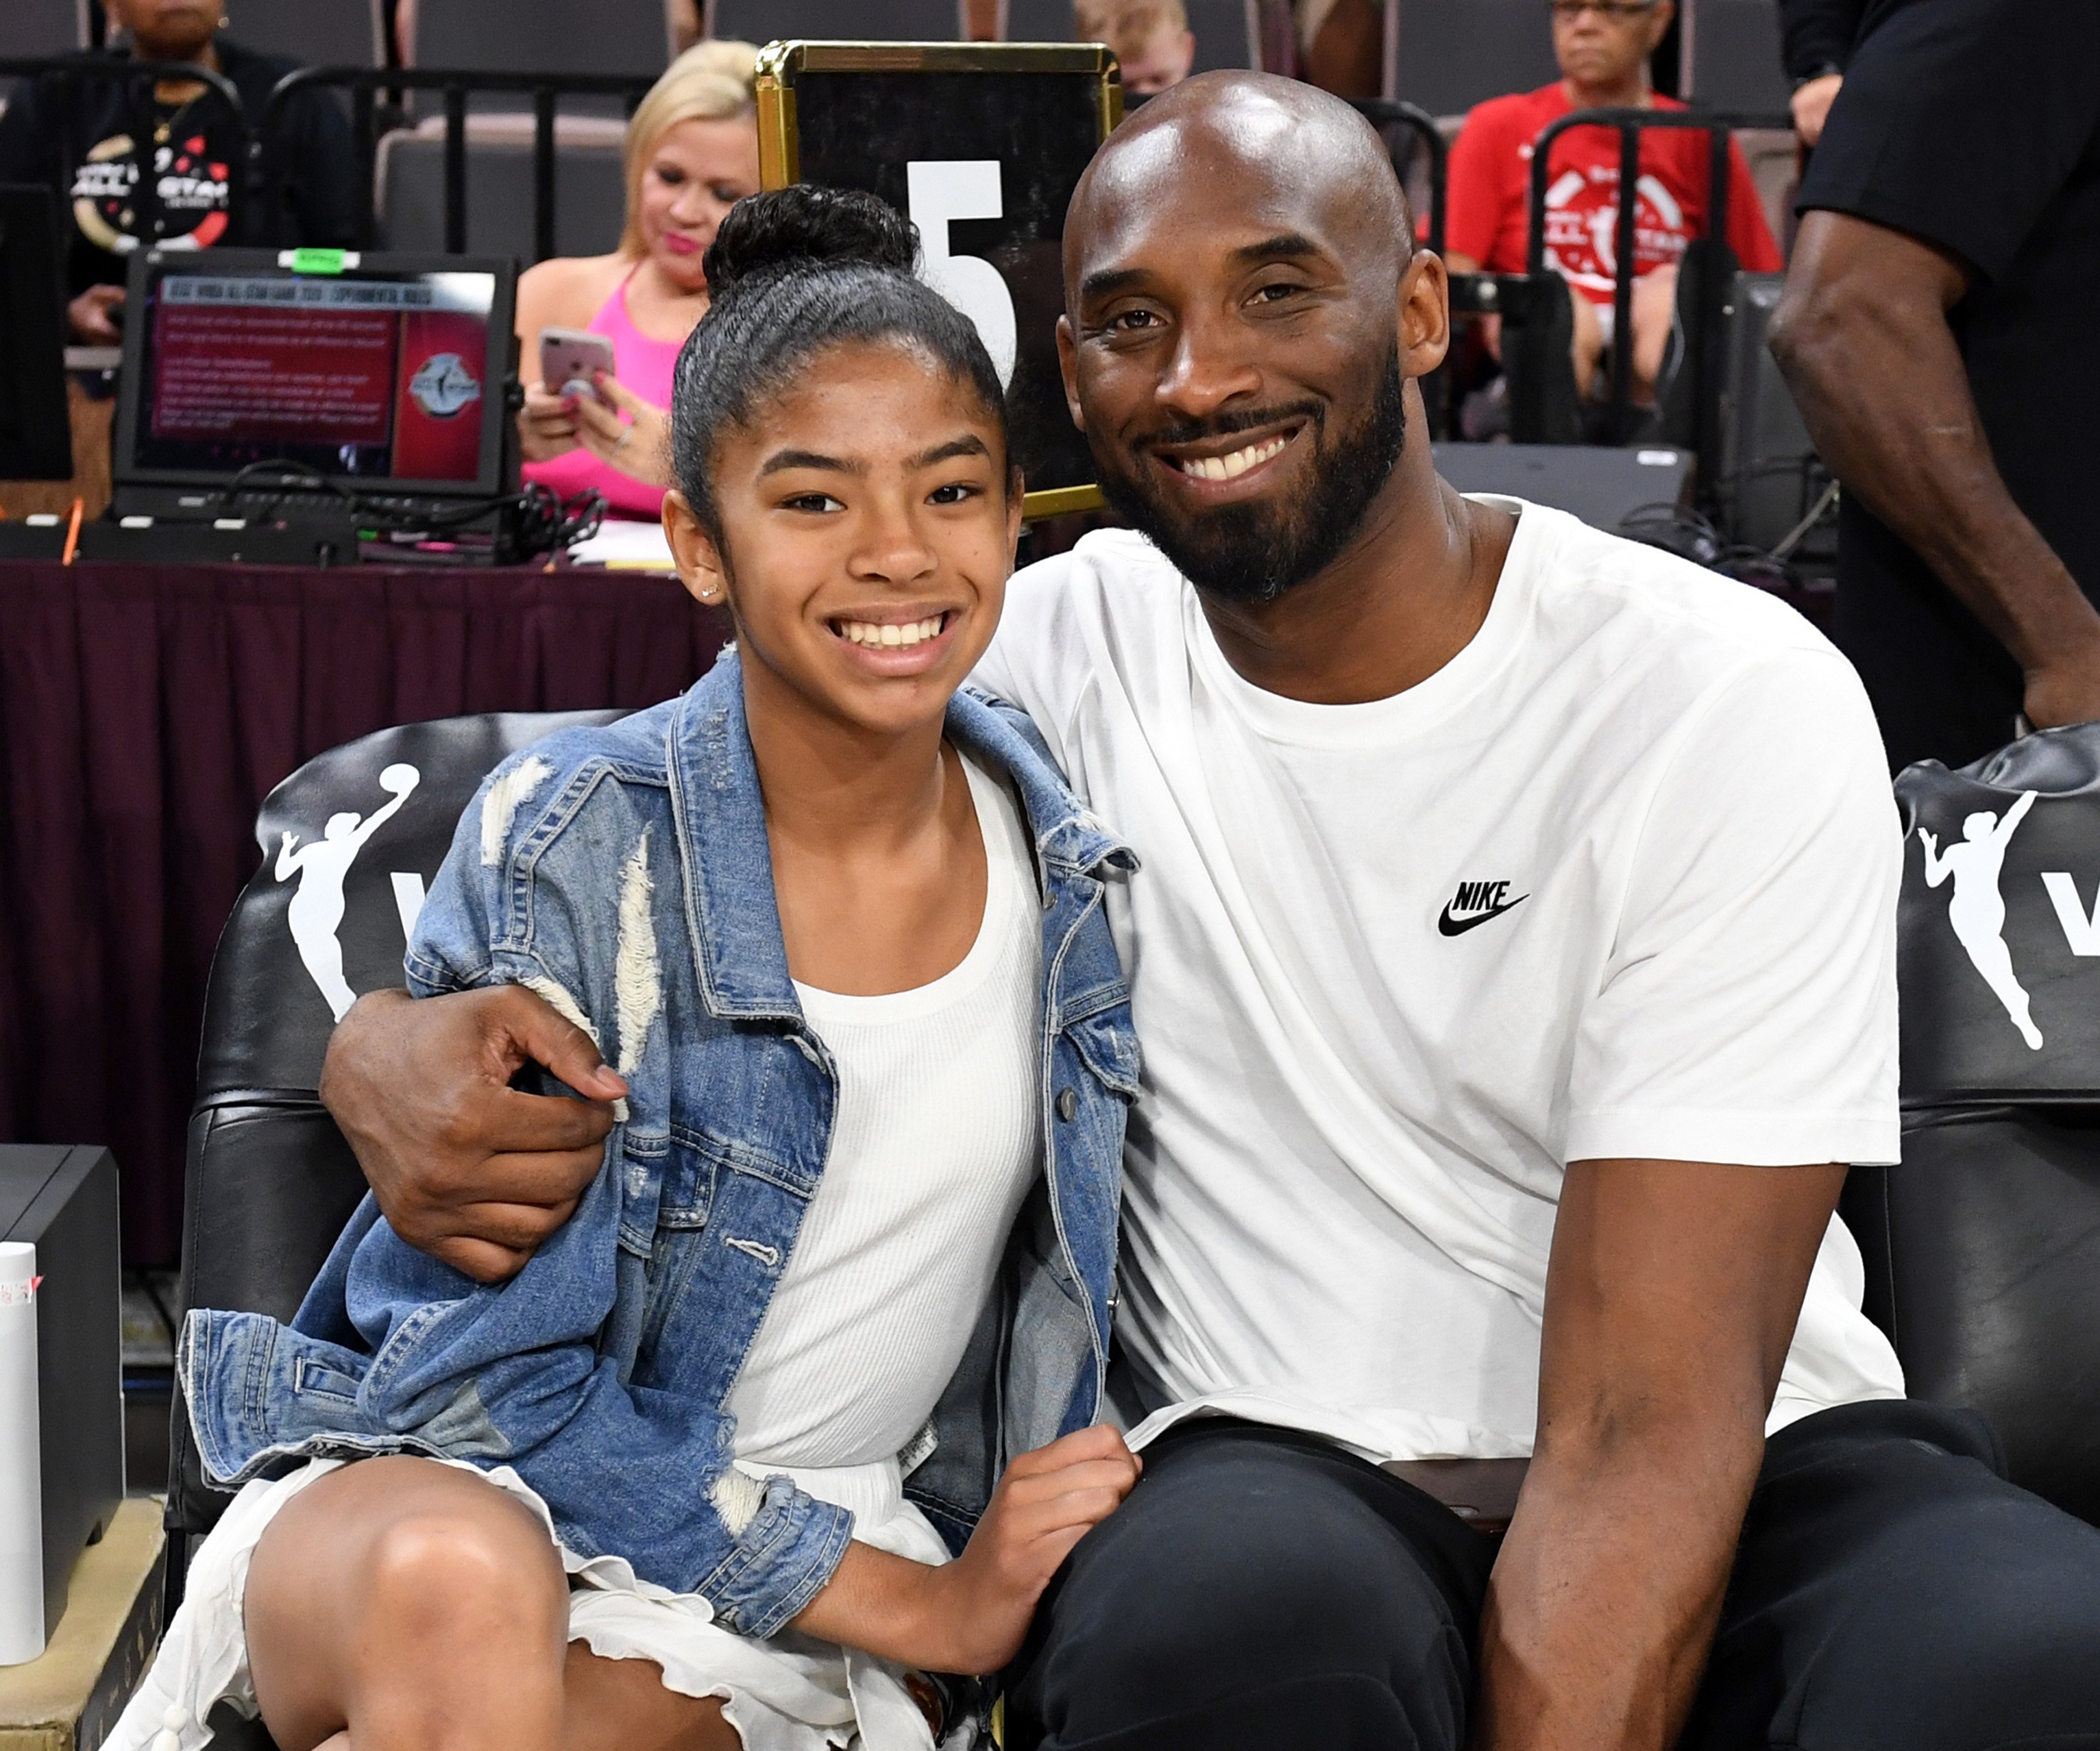 Kobe Bryant and his daughter, Gianna Bryant watching a basketball game. | Photo: Getty Images